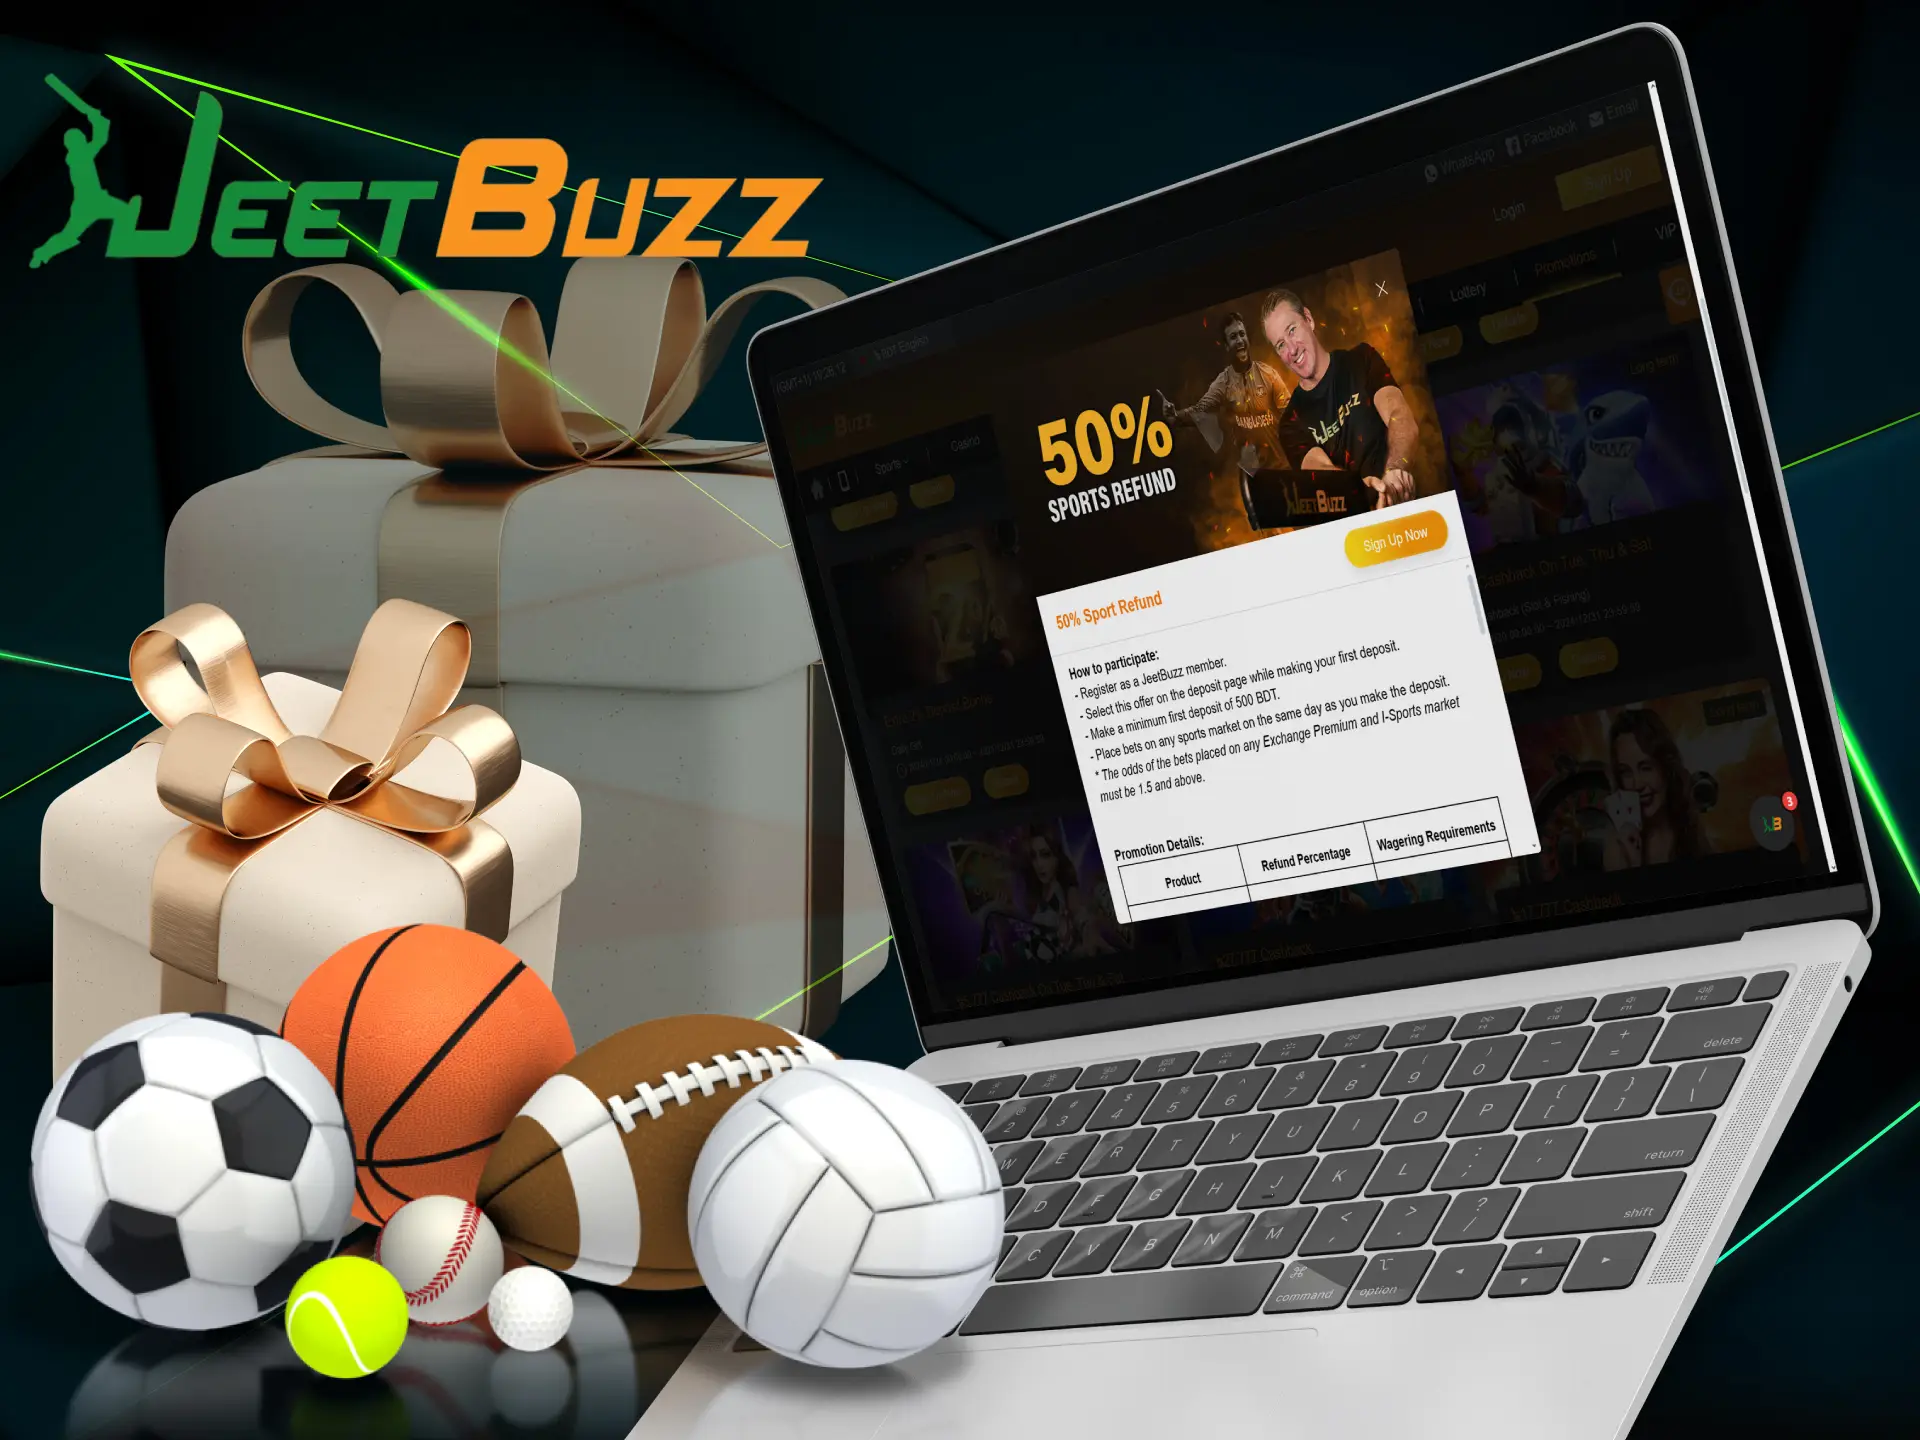 Fulfill the wagering requirement and get a 50% cashback bonus on sports.